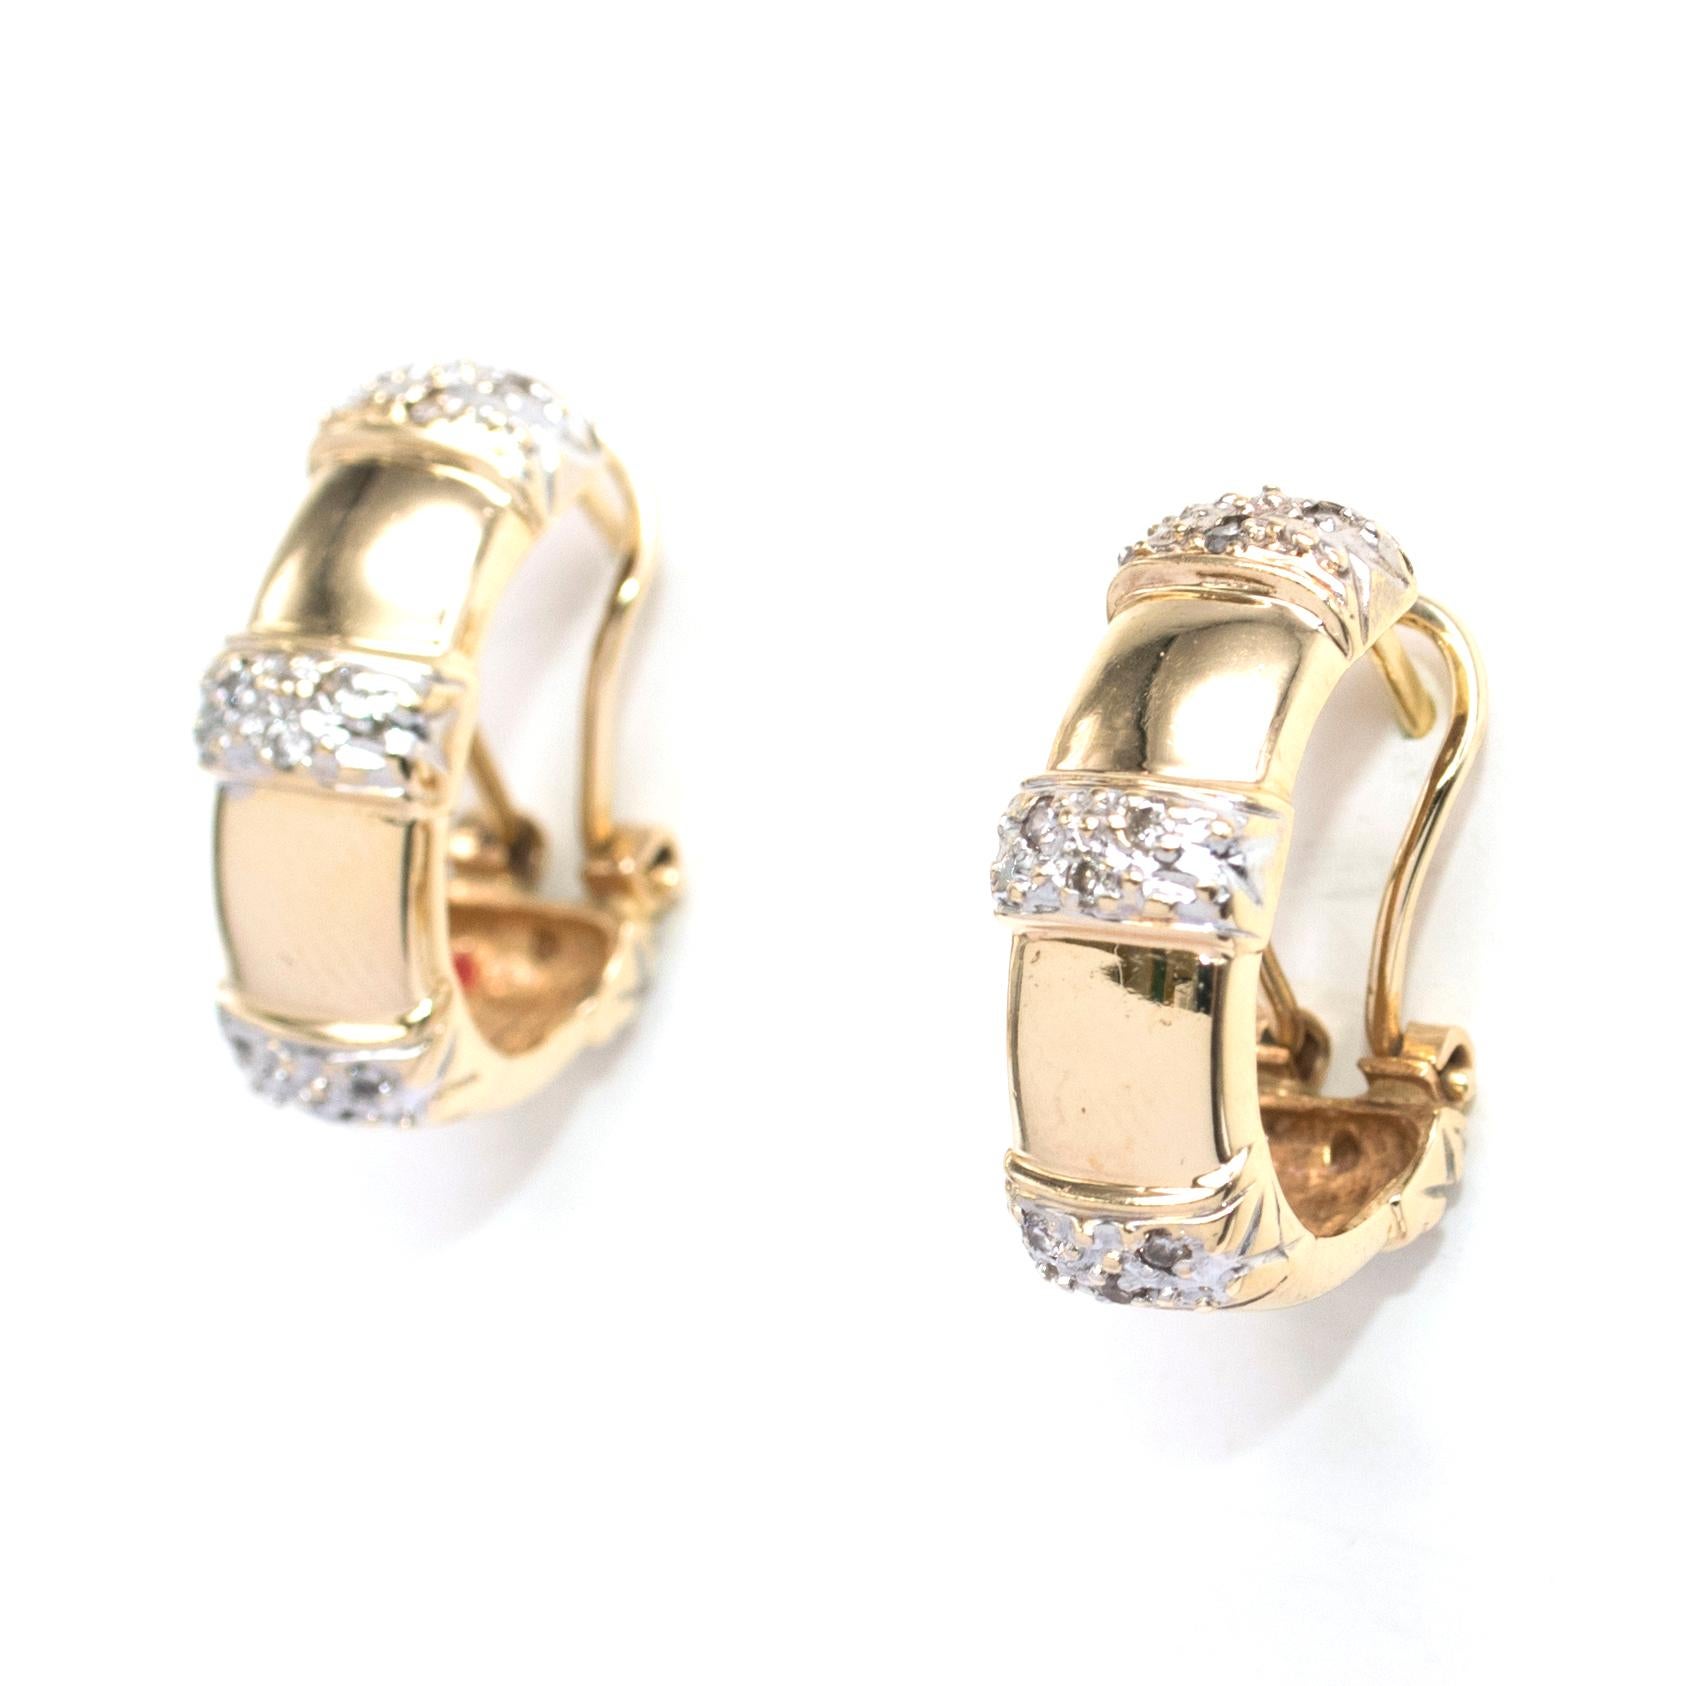 Bespoke diamond pave oval-hoop yellow-gold earrings 

- Yellow-gold oval hoops 
- High quality white diamond-pave encrusted stripes
- Hinged post-back fastening  
- Please note that earrings are none refundable  

Please note, these items are